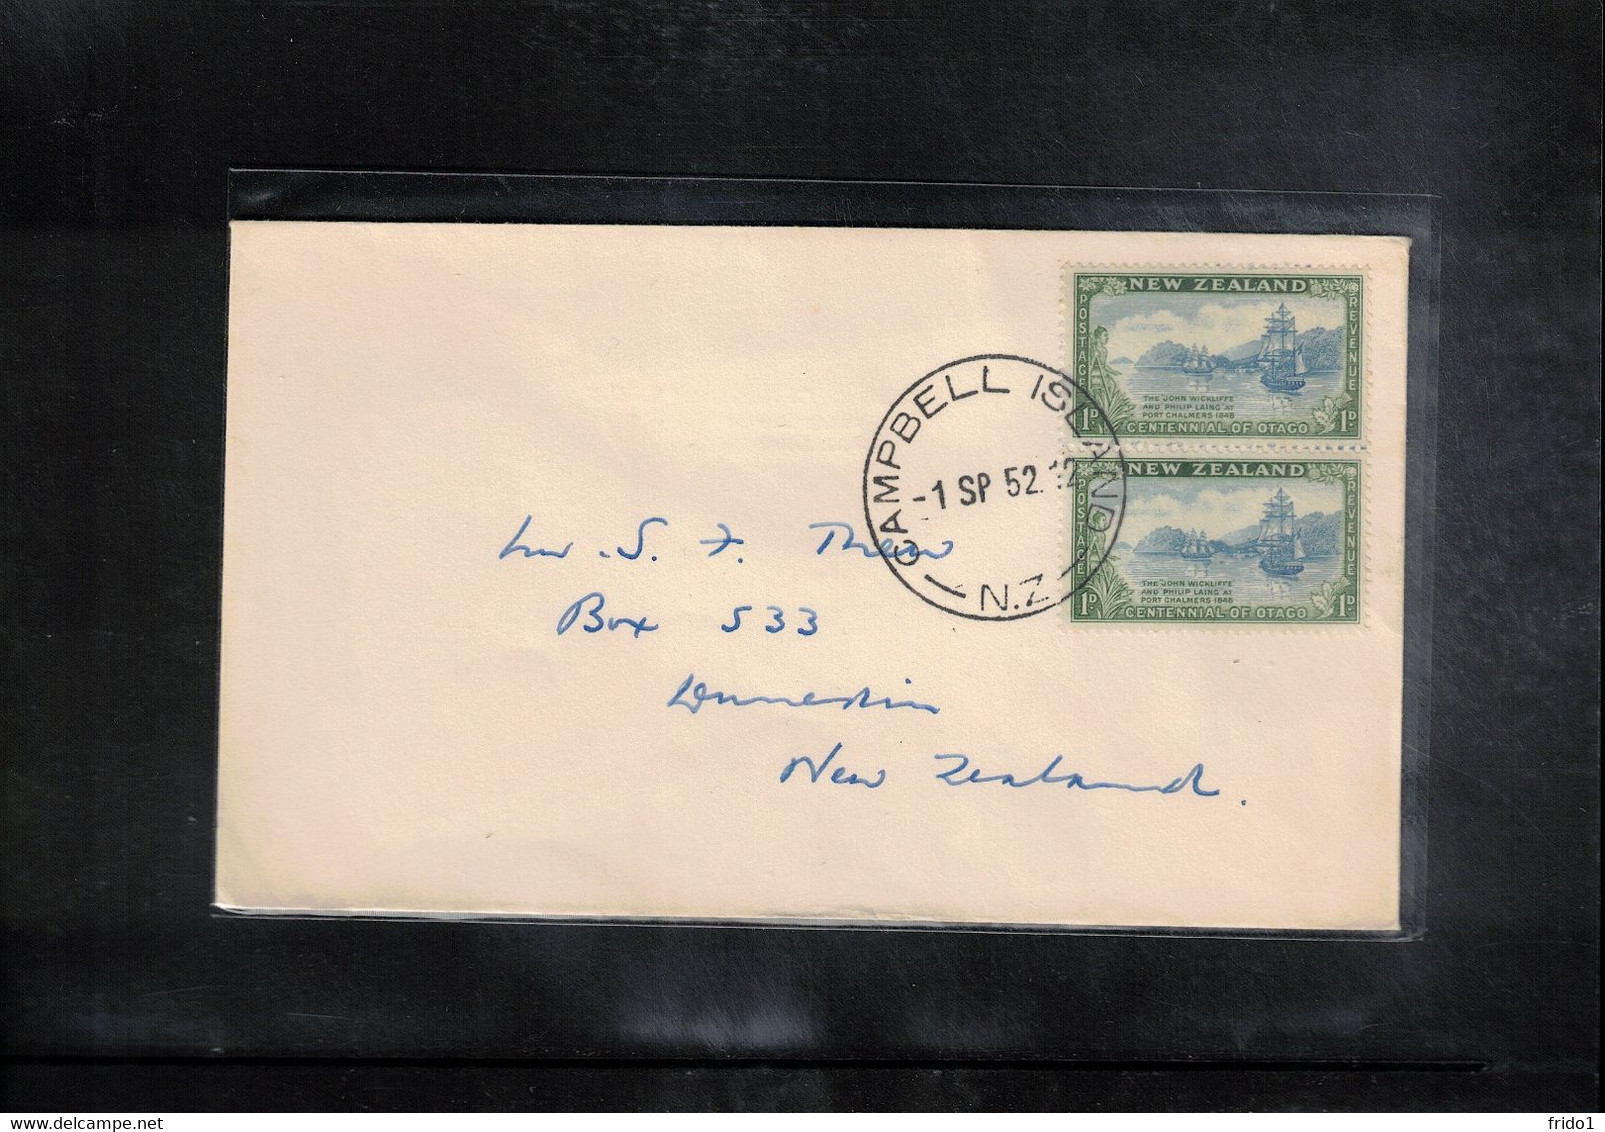 Ross Dependency 1952 Campbell Island Interesting Cover - Lettres & Documents